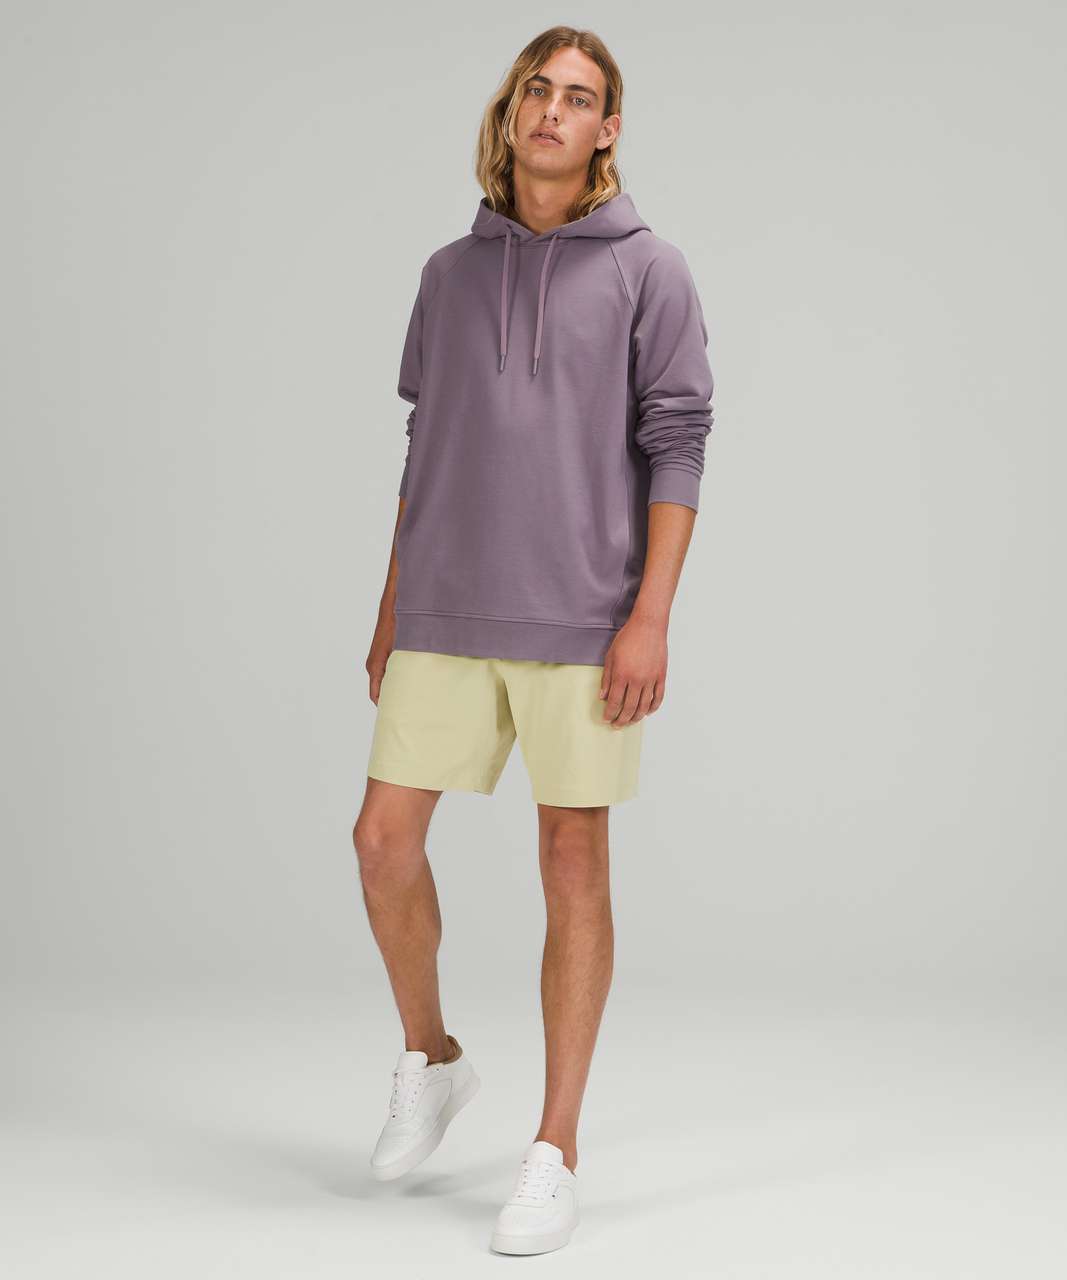 Lululemon City Sweat Pullover Hoodie French Terry - Dusky Lavender